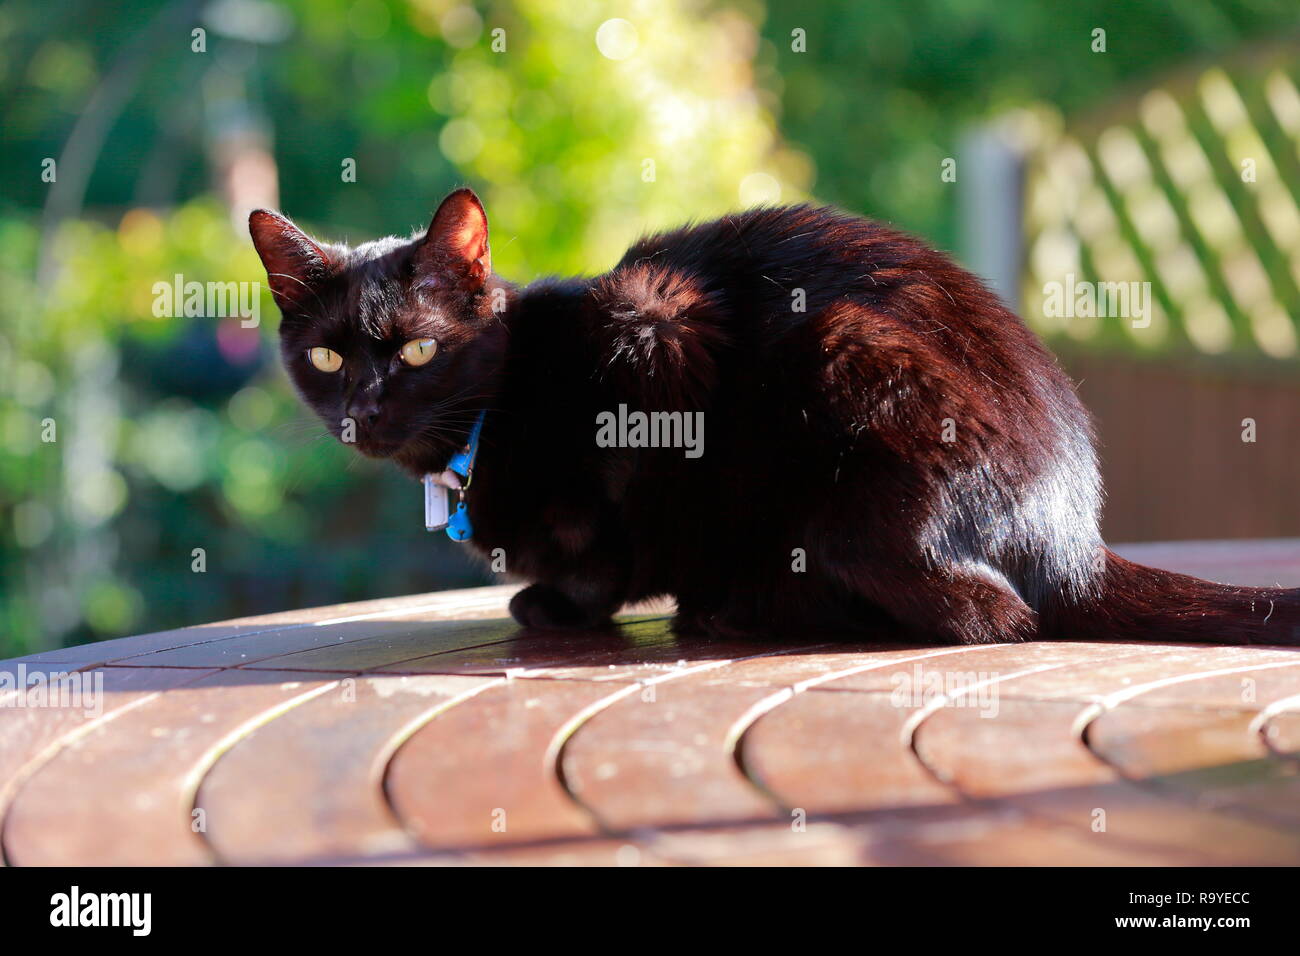 A Black Cat resting on a patio table Stock Photo